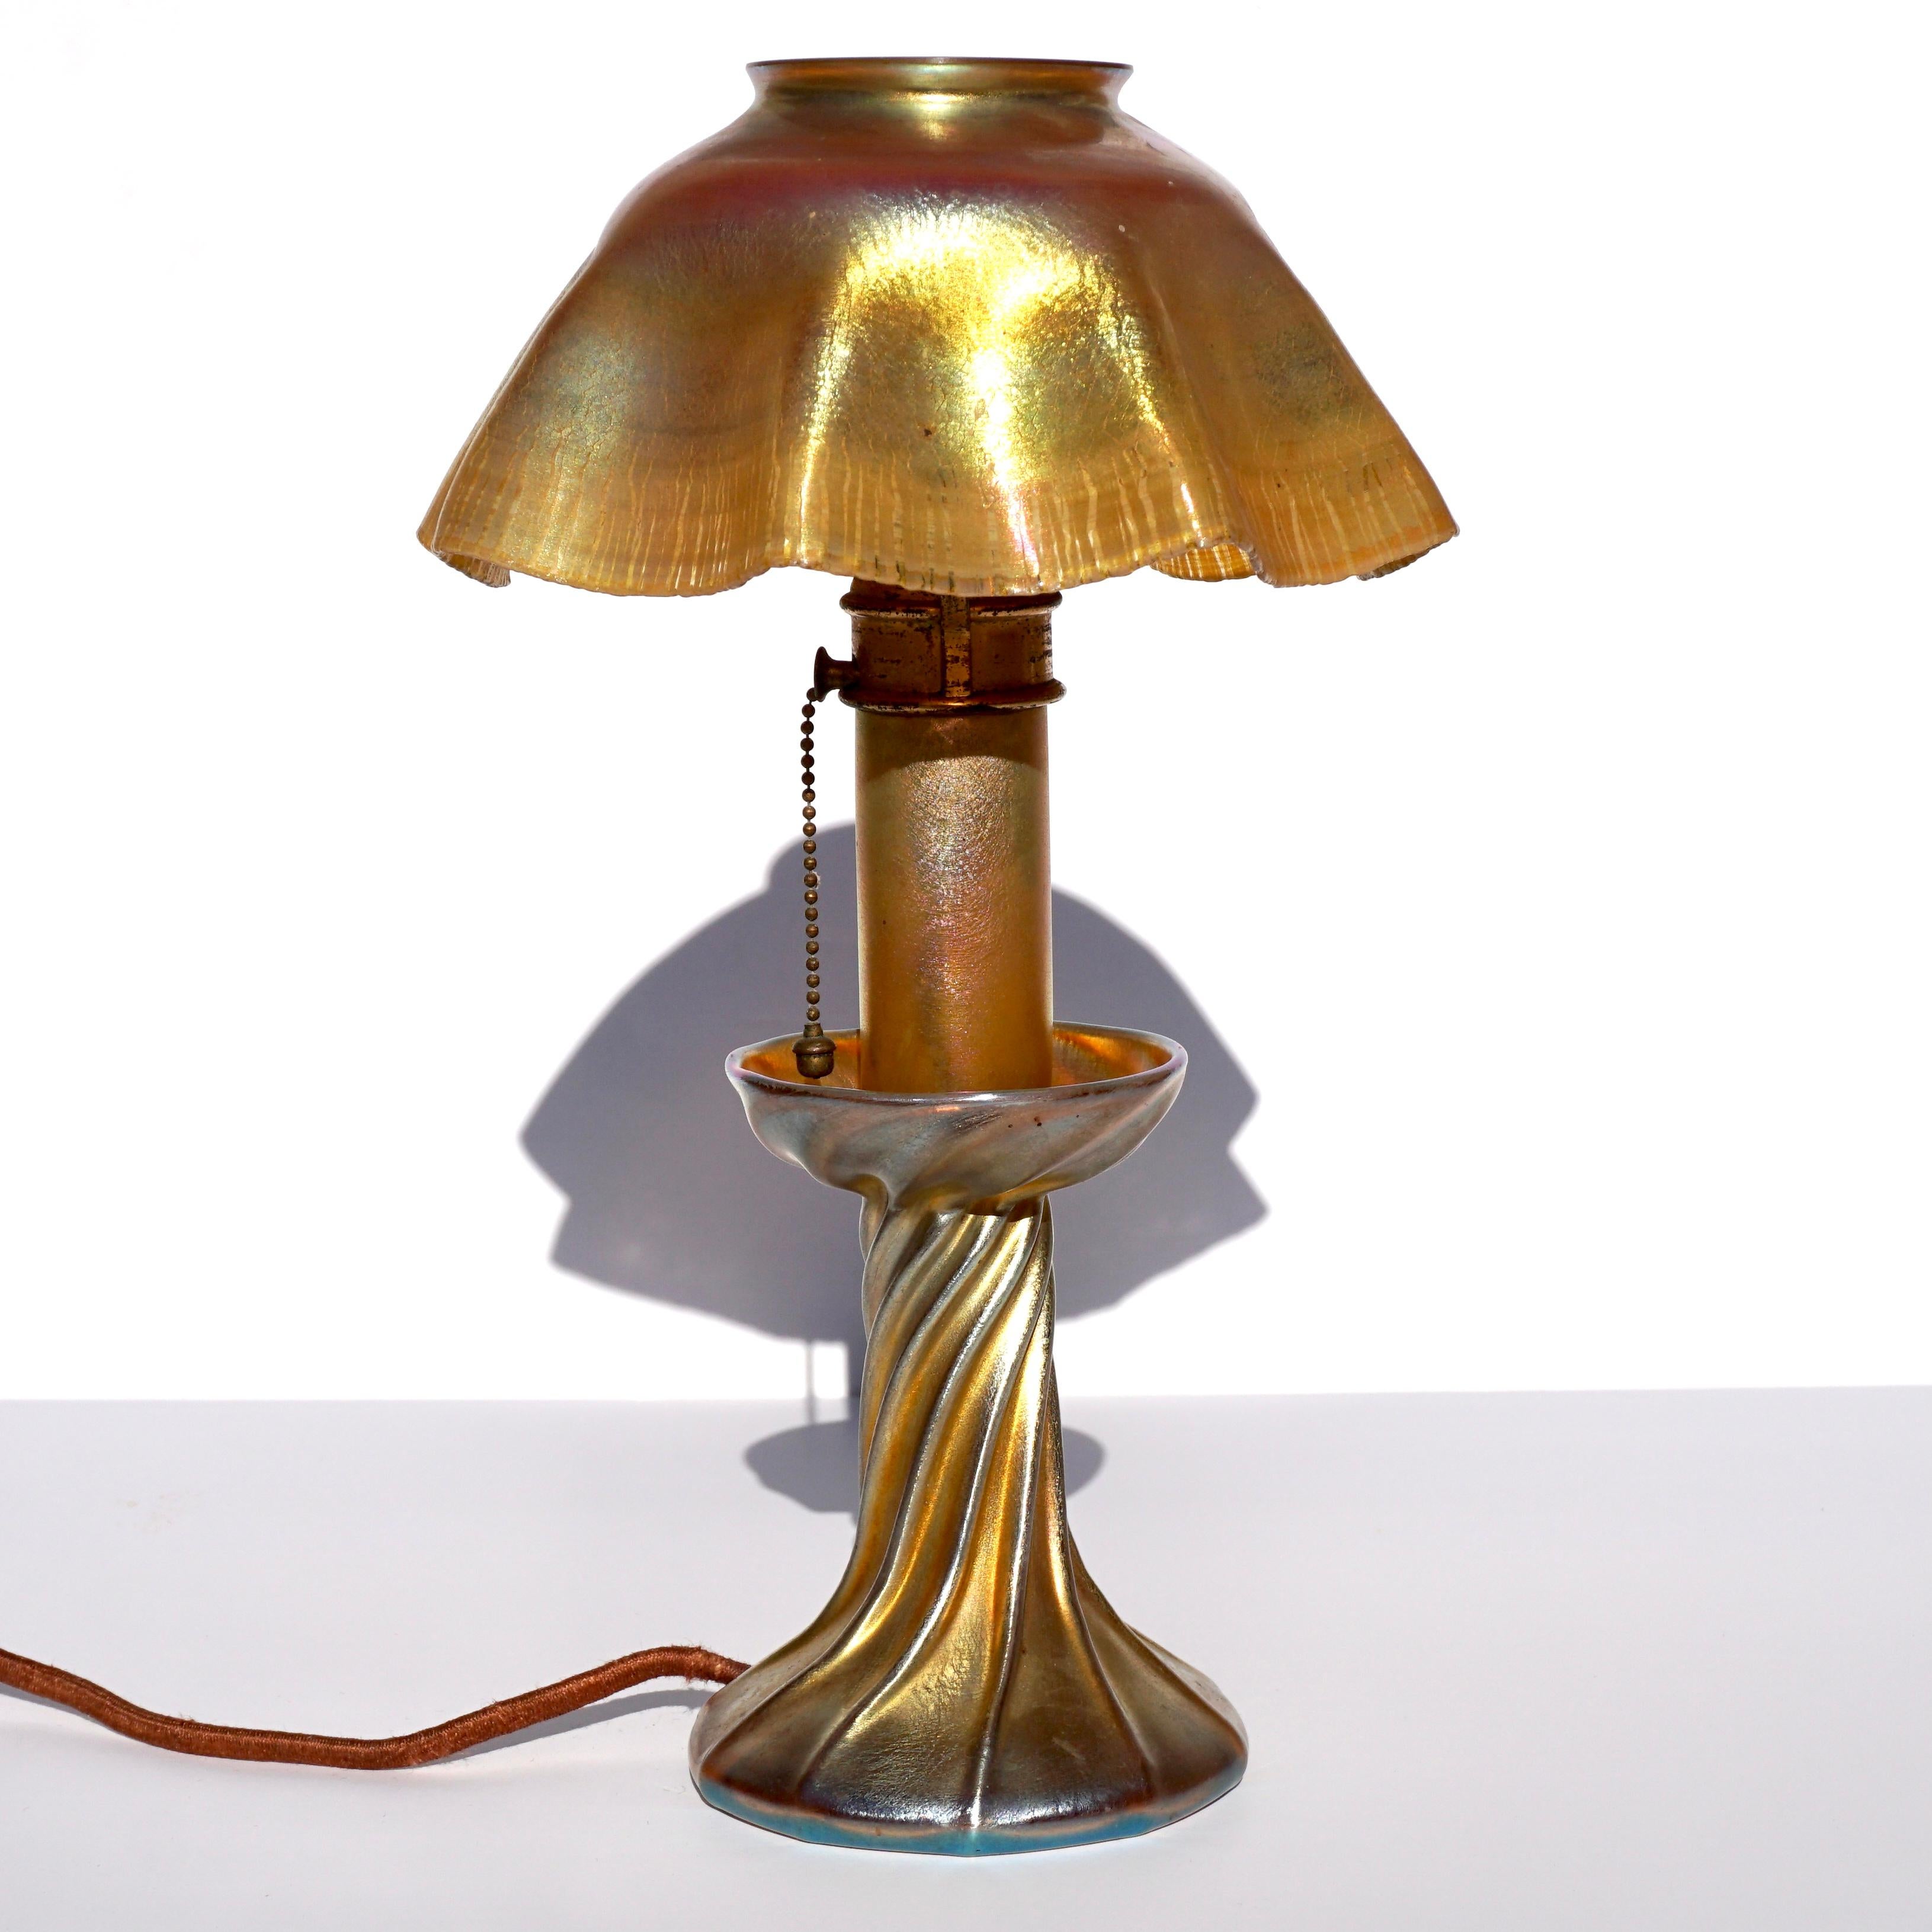 A stunning favrile candle table lamp. Gold. iridescent base, mid section and shade made from Tiffany blown glass with metal harp holding the fluted shade, A perfect gift for yourself or the one you love!

Louis Comfort Tiffany Art Nouveau Favrile